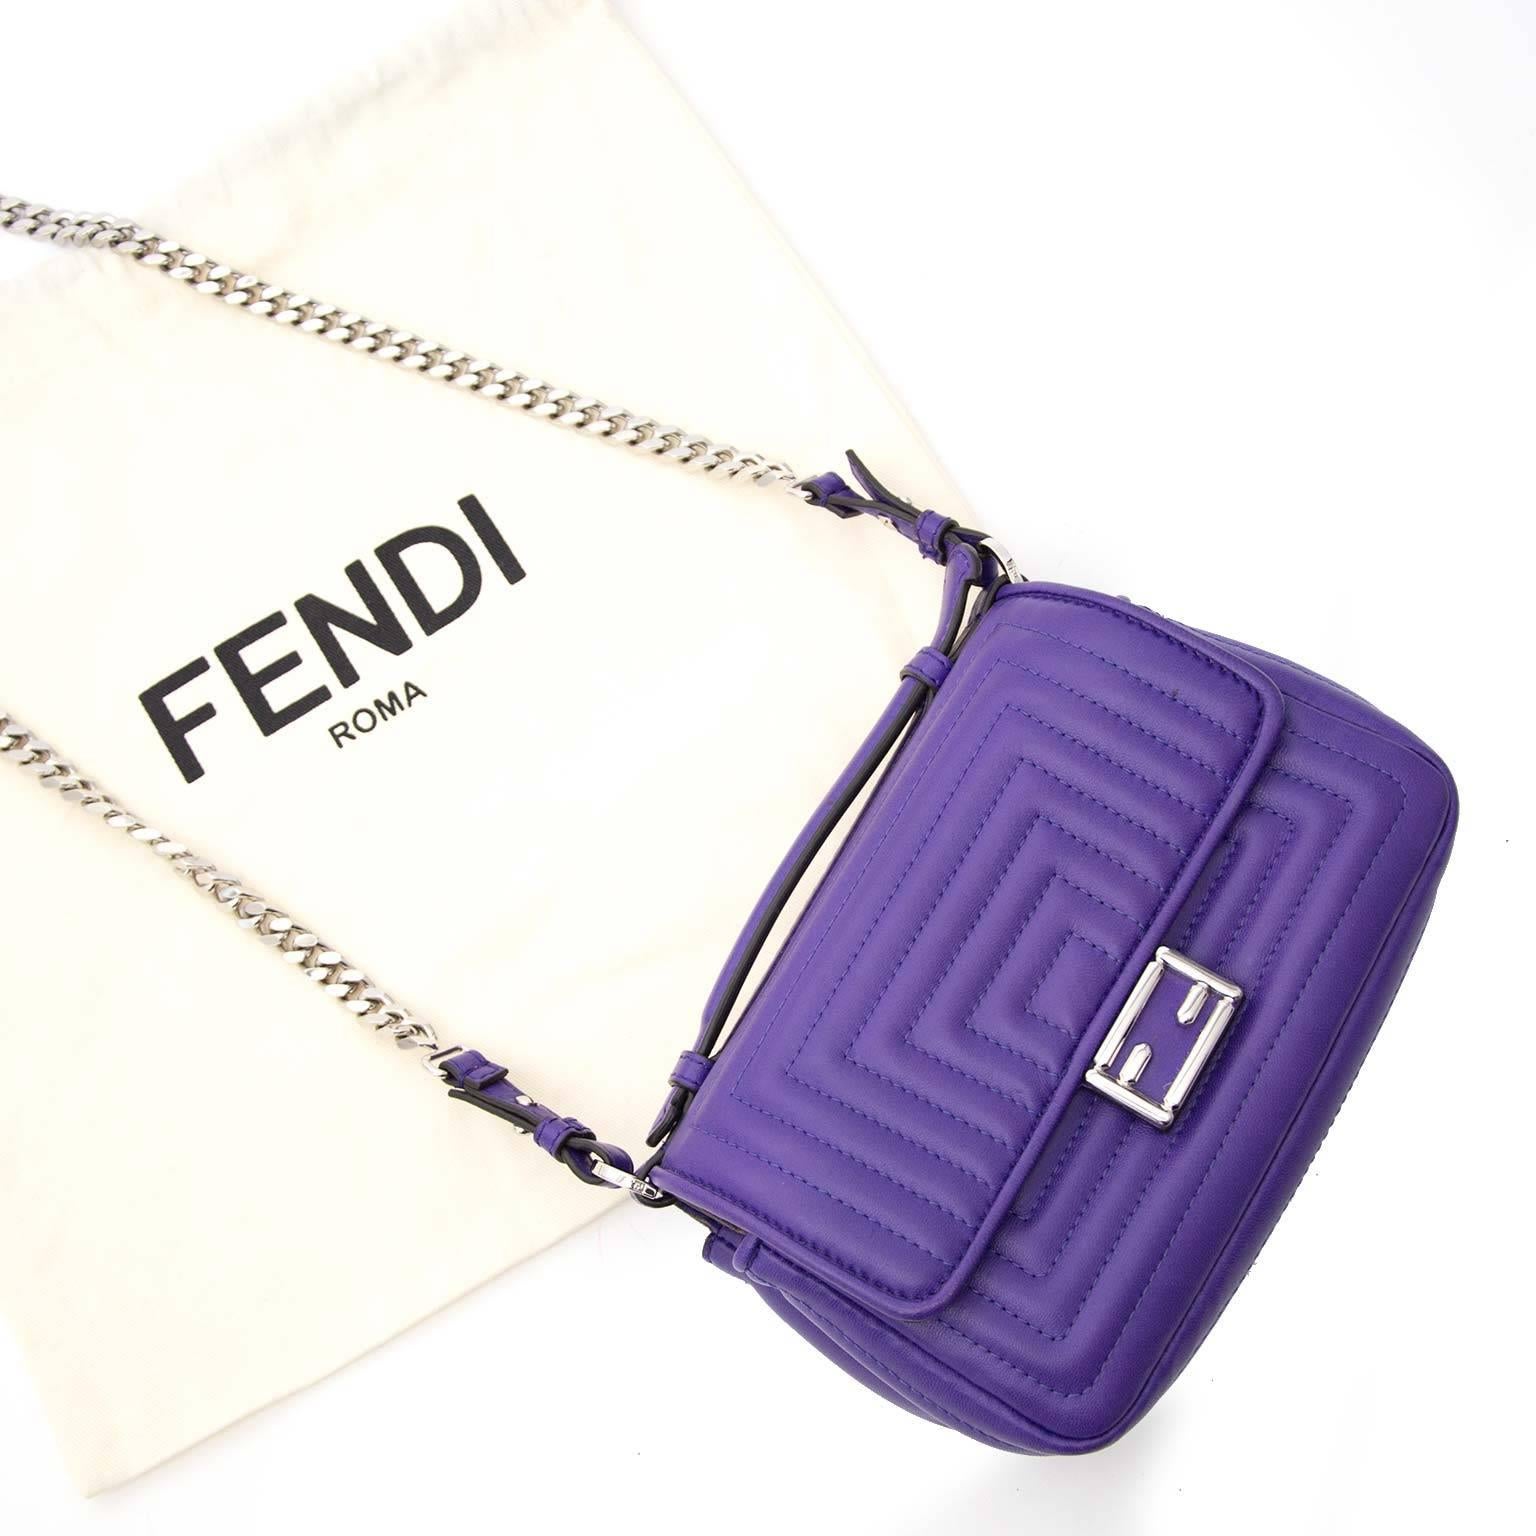 Very Good Preloved Condition

est retai pirce €1250,-

Fendi Purple Nappa Micro Double Baguette

This cute Fandi Baguette bag is crafted of quilted and smooth purple nappa leather.
This small yet functional handbag features a quilted lined detail on